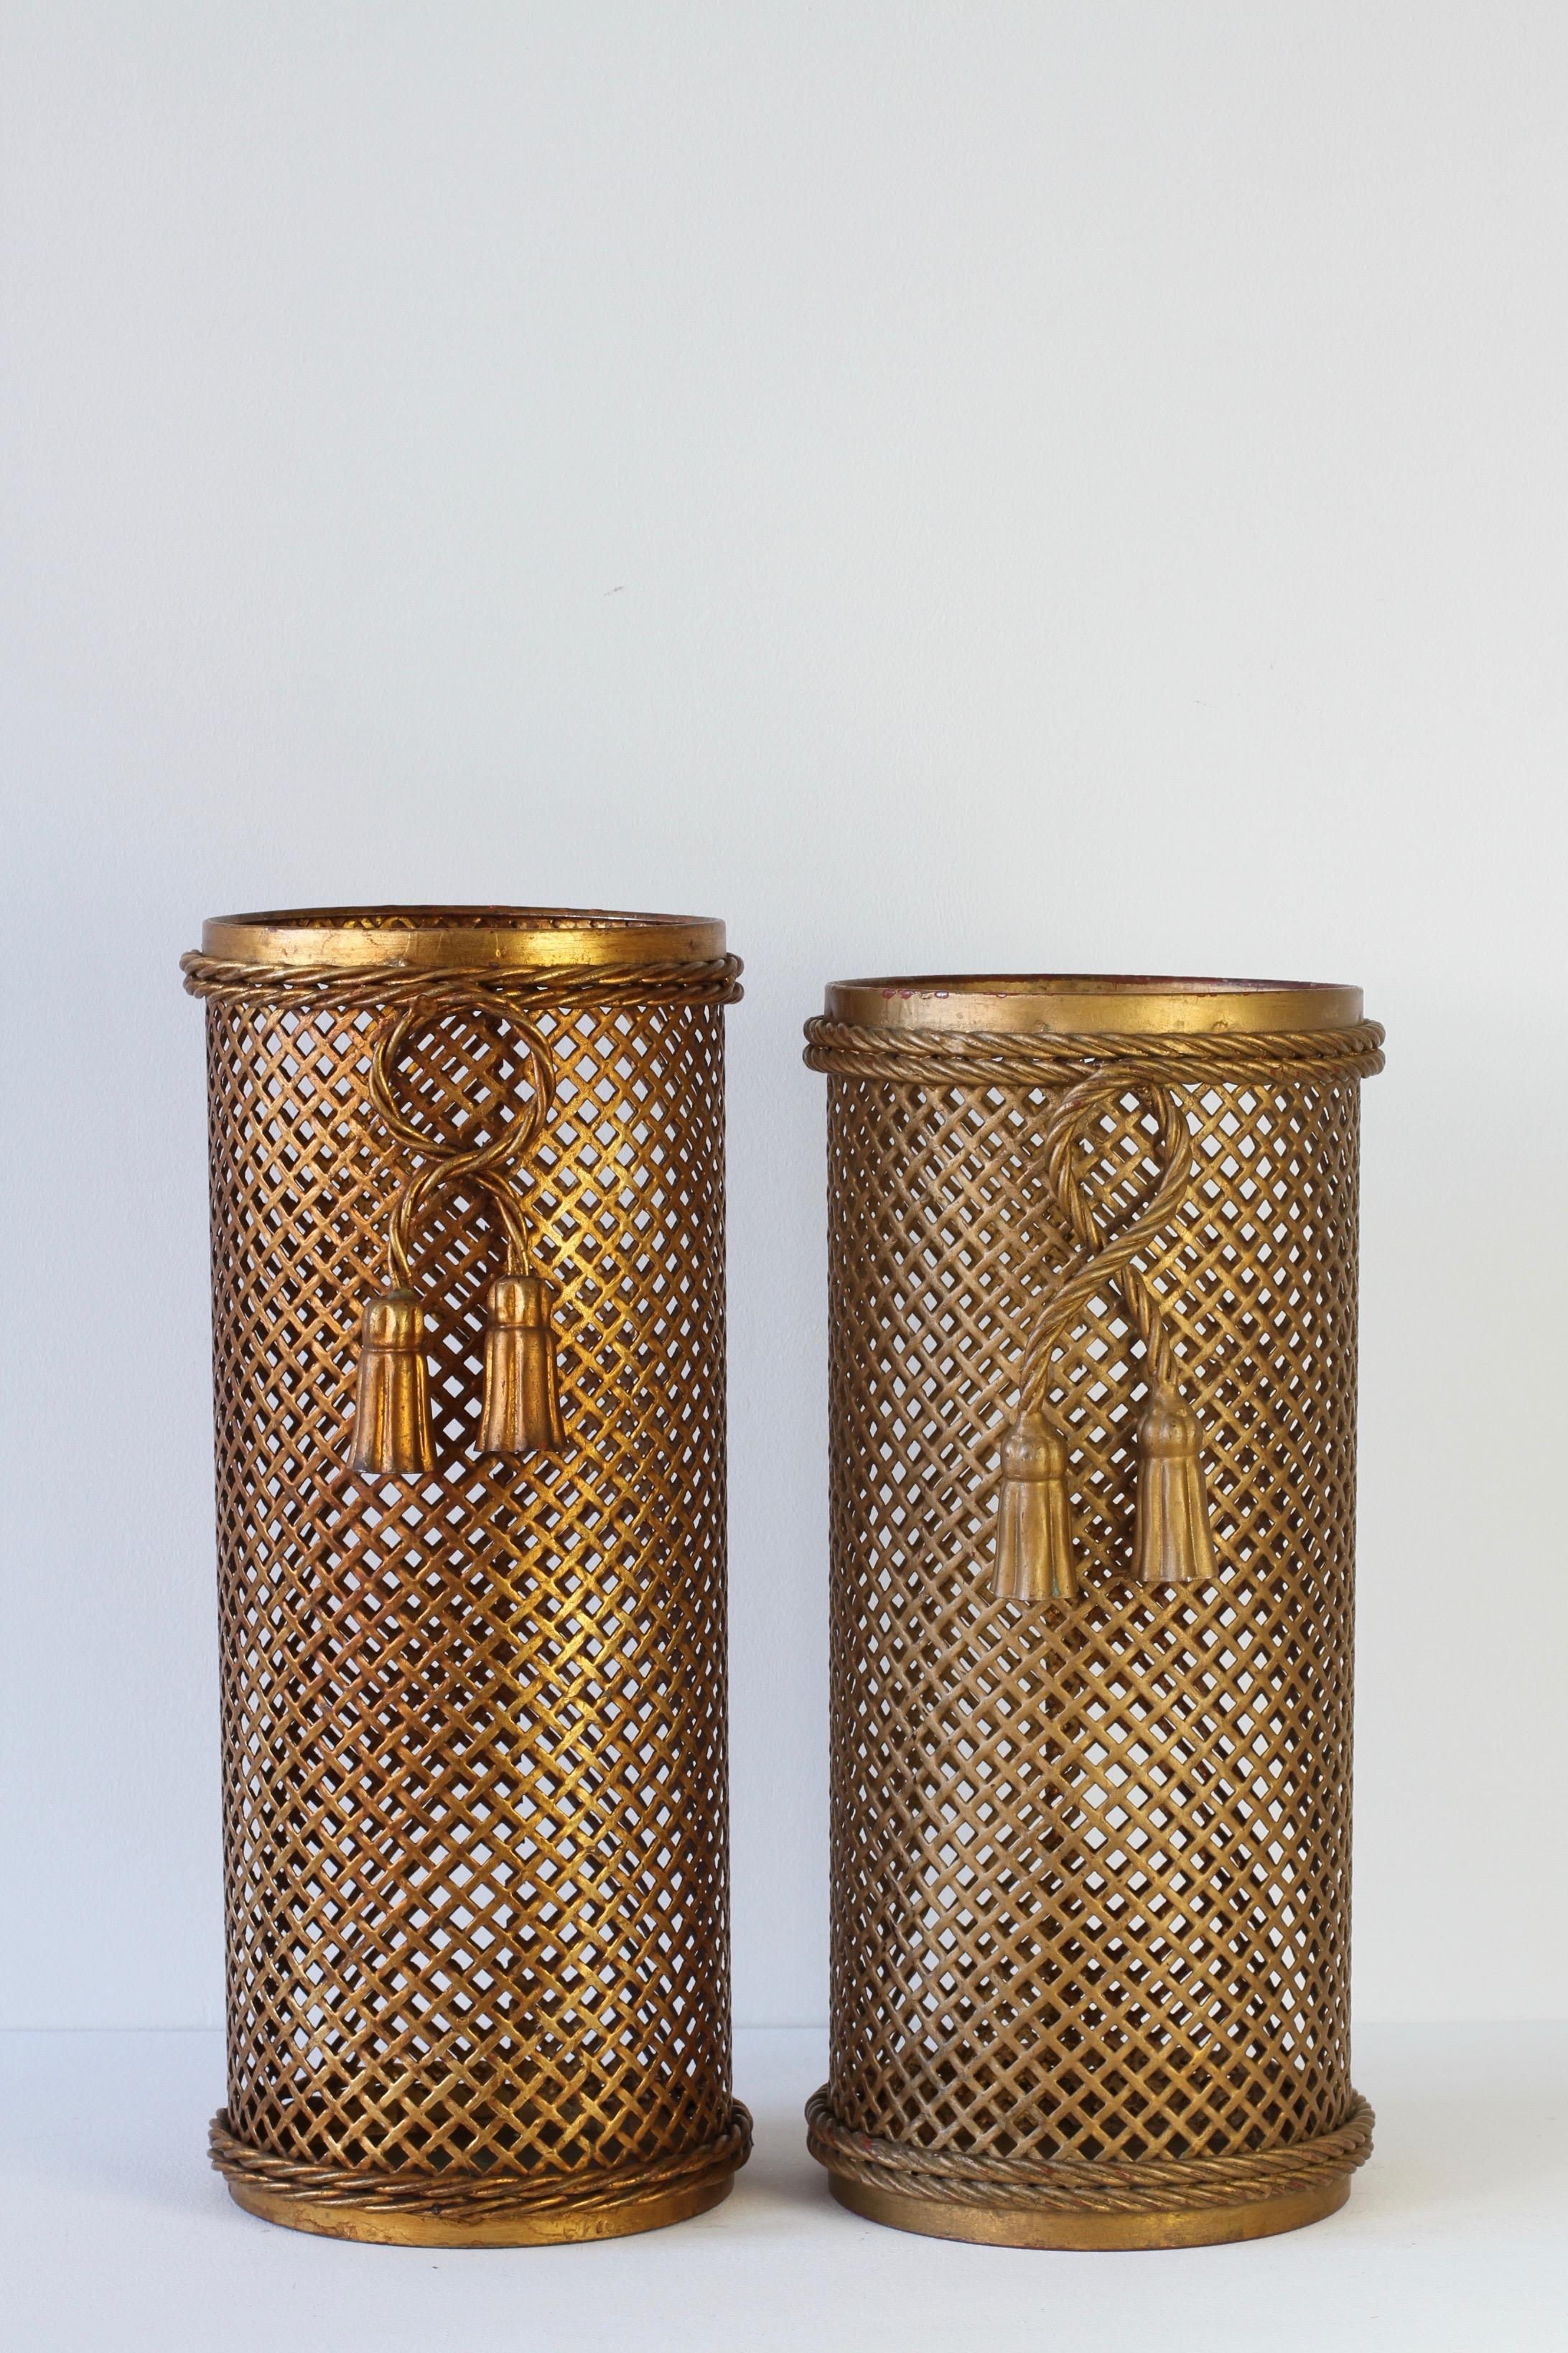 Stunning pair of midcentury gold / gilt / gilded Hollywood Regency style umbrella Stands / holders made in Florence, Italy, circa 1950 attributed to Li Puma Firenze. The perforated lattice patterned metalwork with bent rope and tassel details